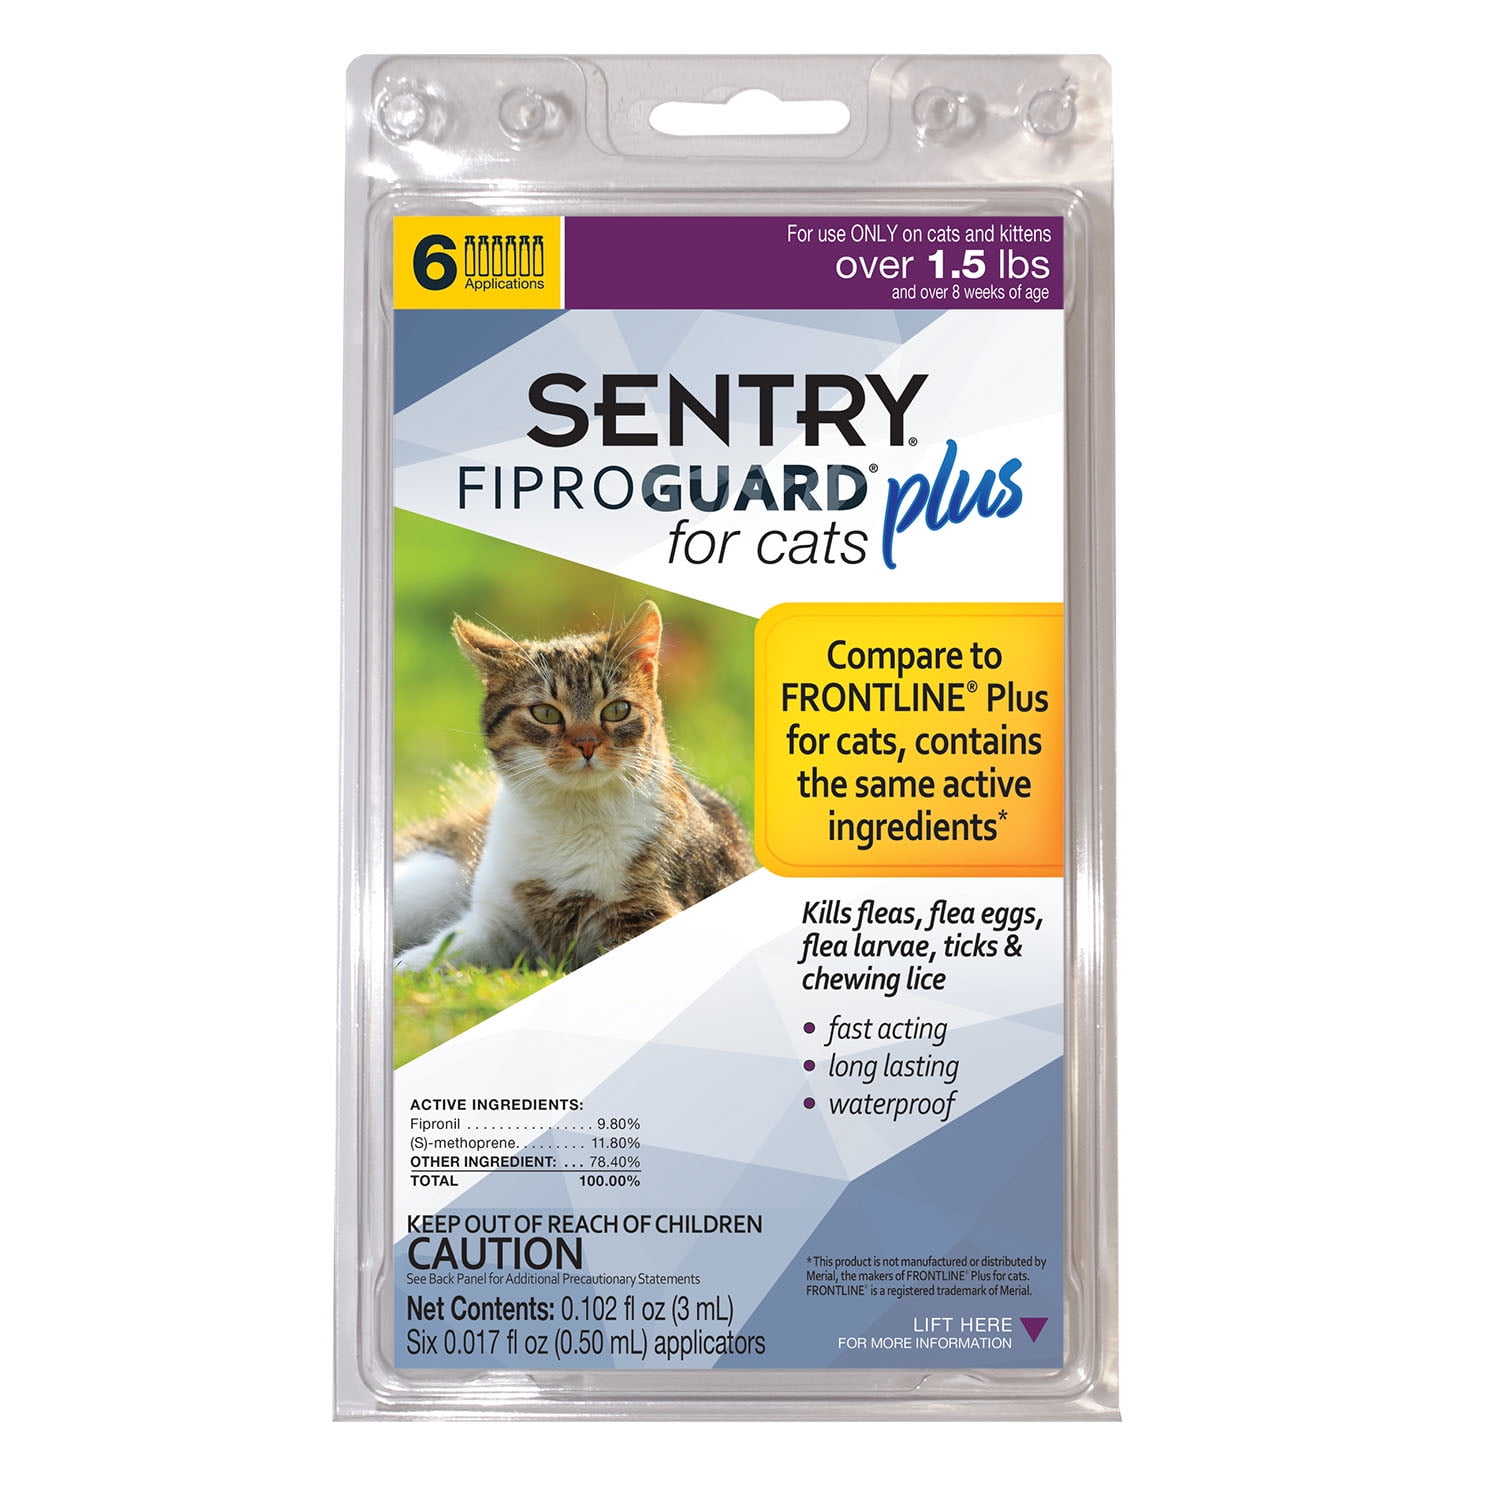 advecta plus for cats walmart